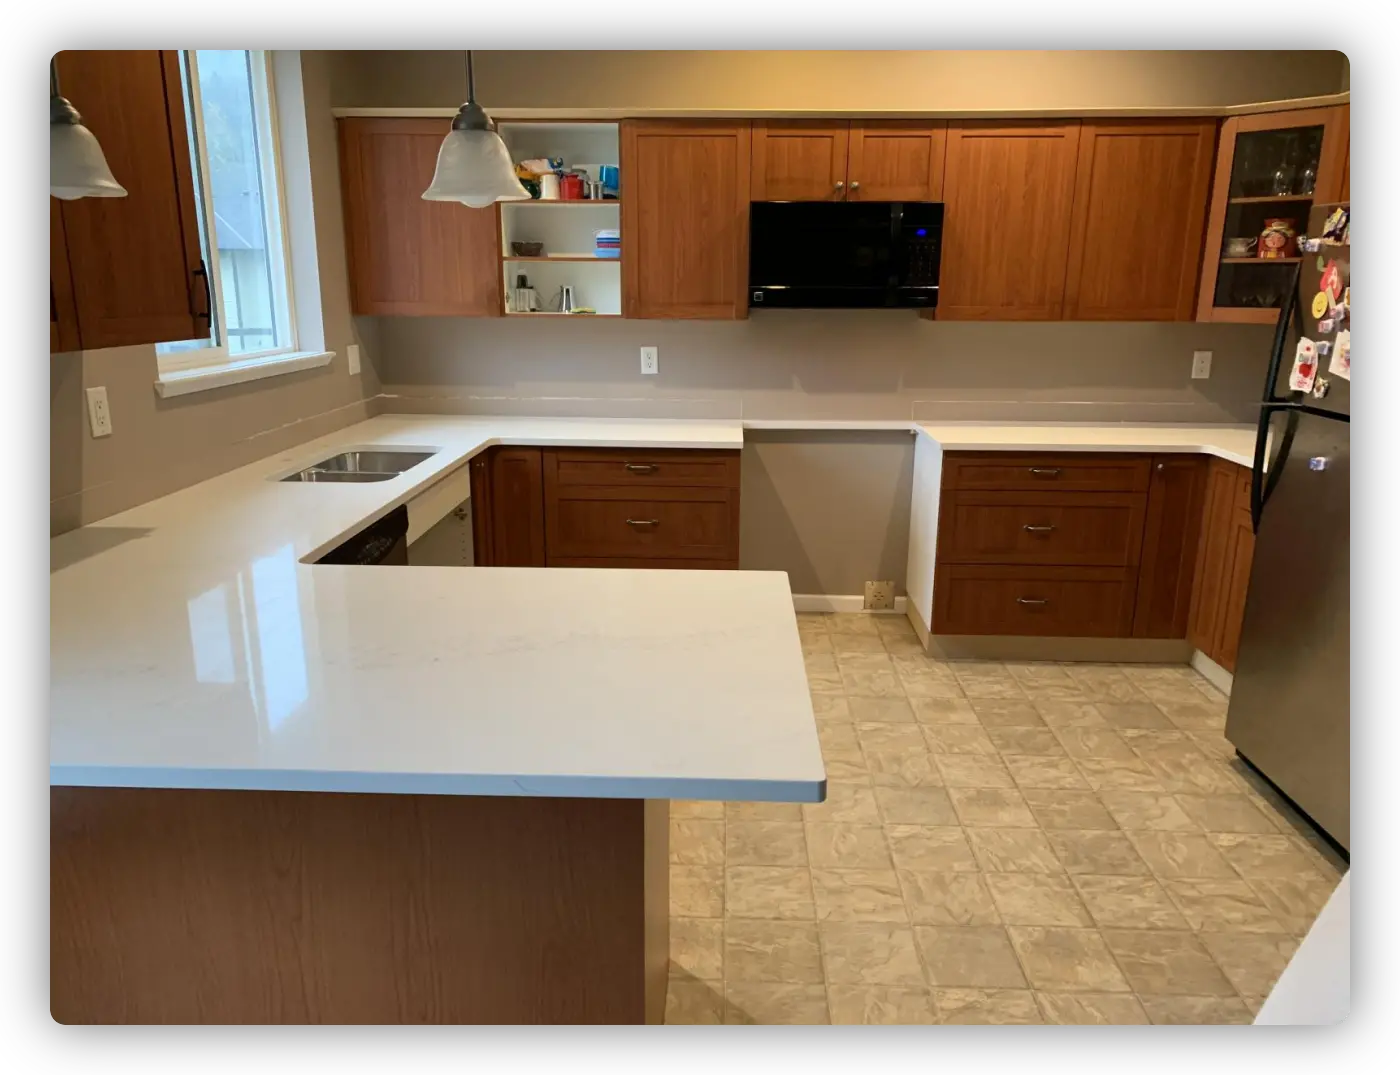 How to paint laminated kitchen cabinets